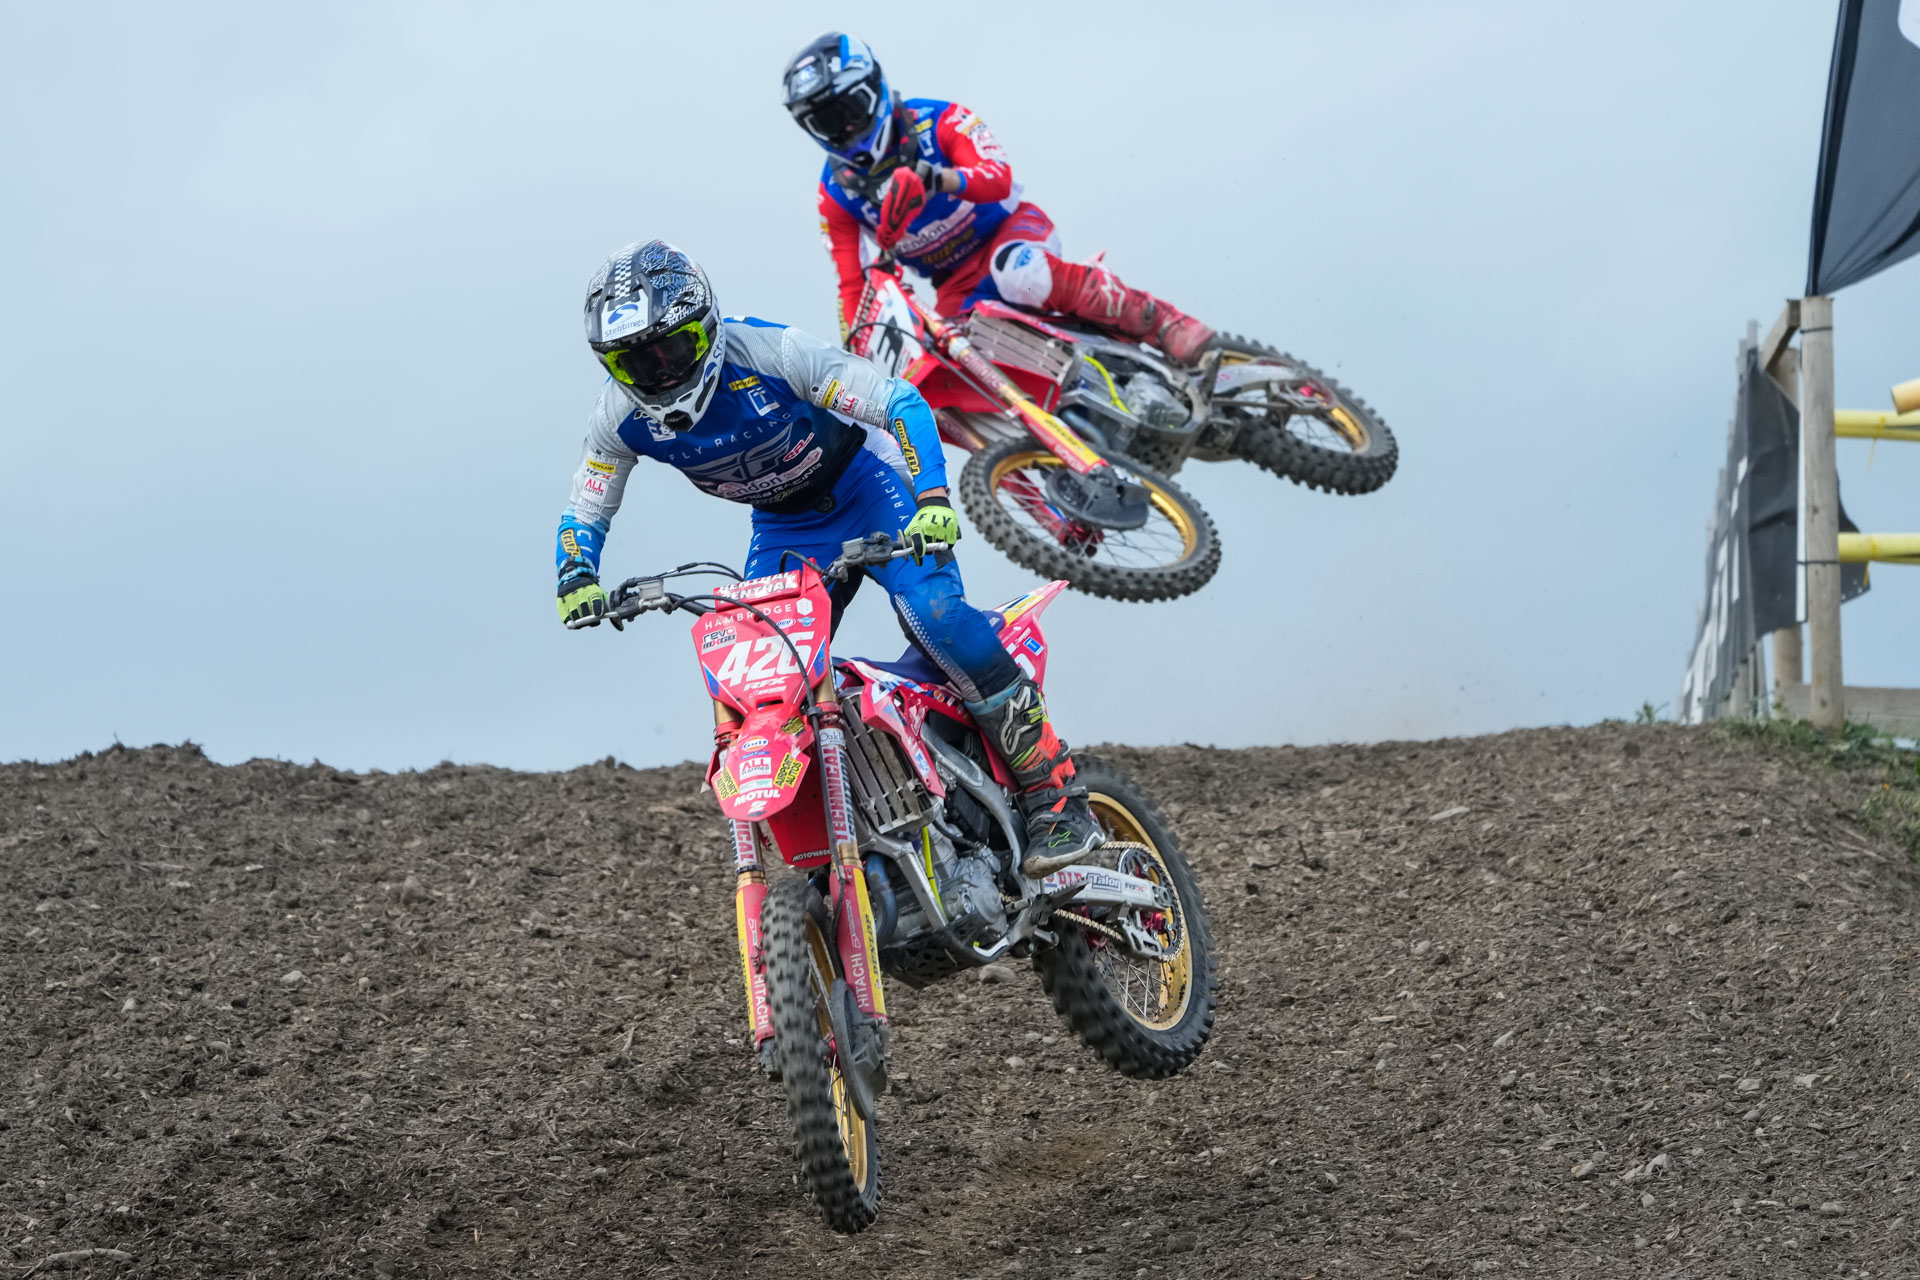 Announcement - Team GB Motocross of Nations Selection